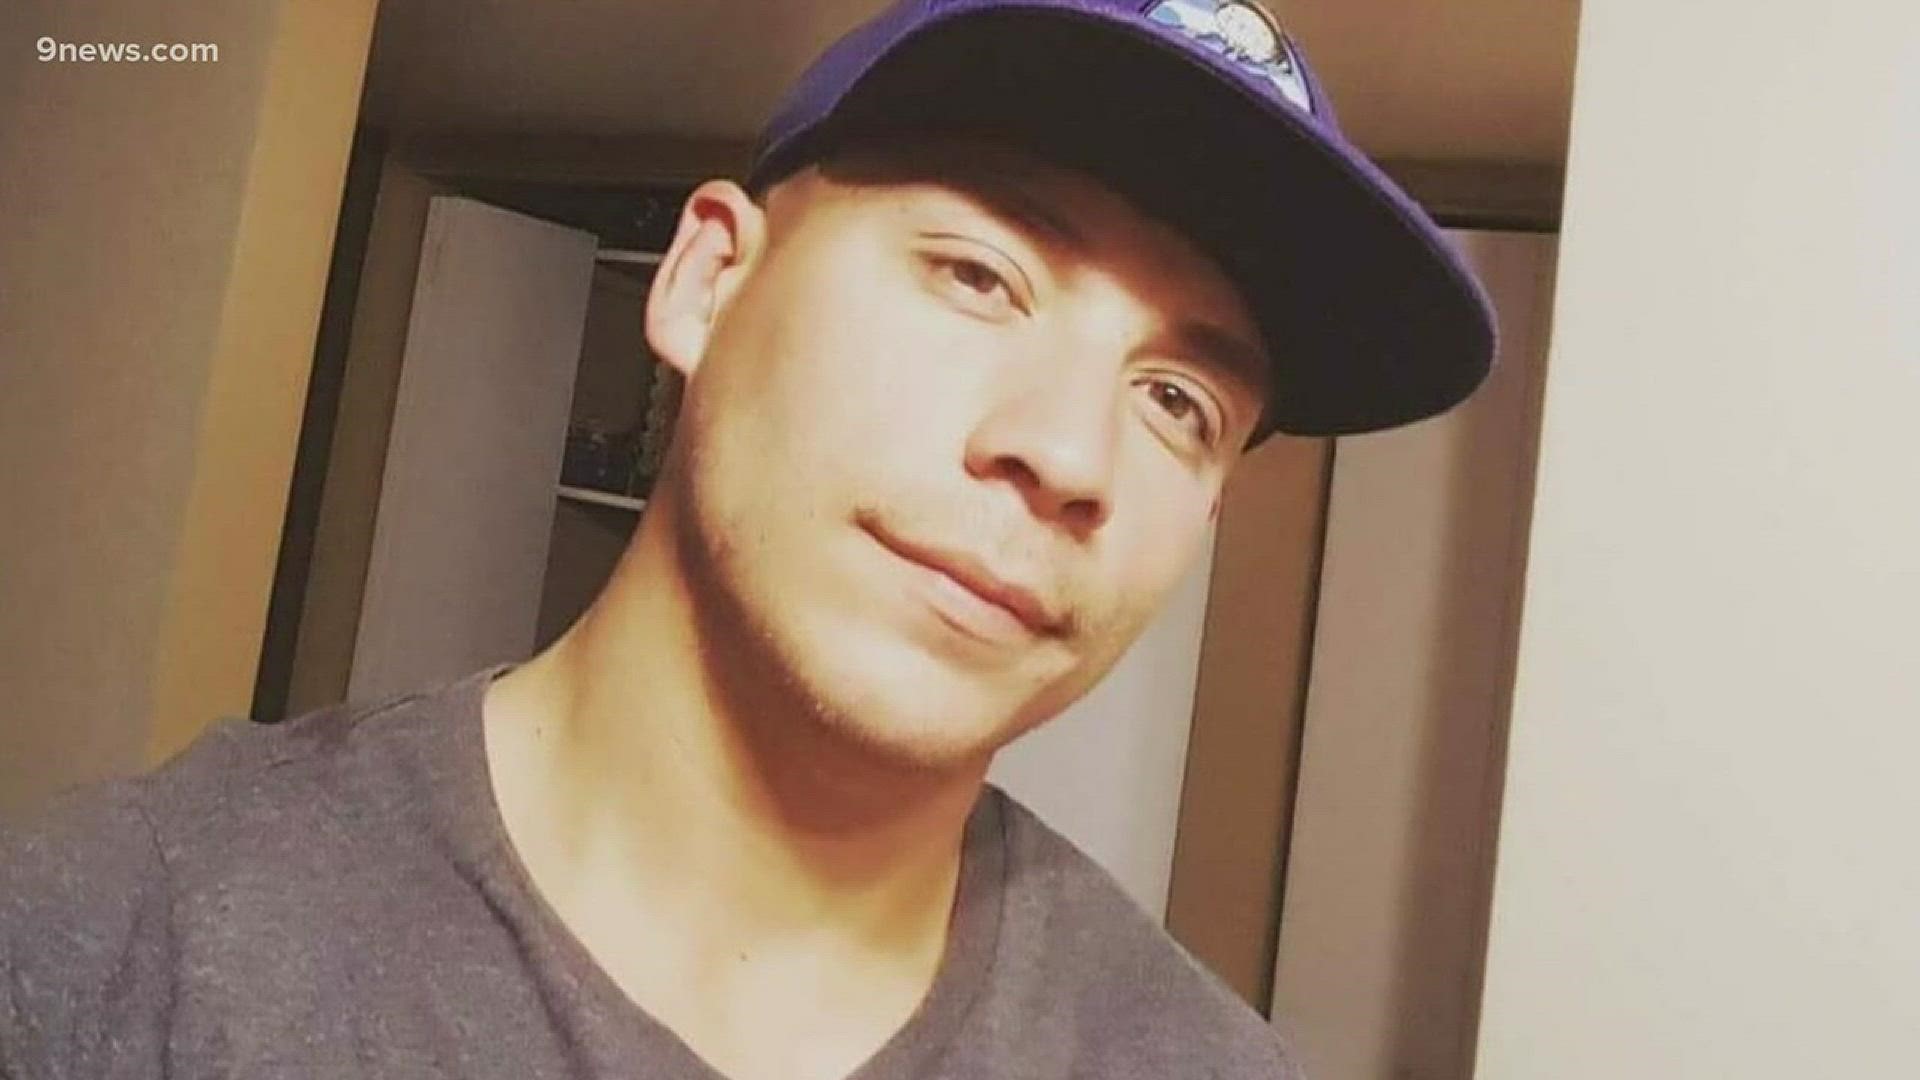 Lucardio Kroener intervened after a shooting in Lower Downtown and was himself shot to death. Now his family and police are hoping someone with information will come forward and help identify a suspect.